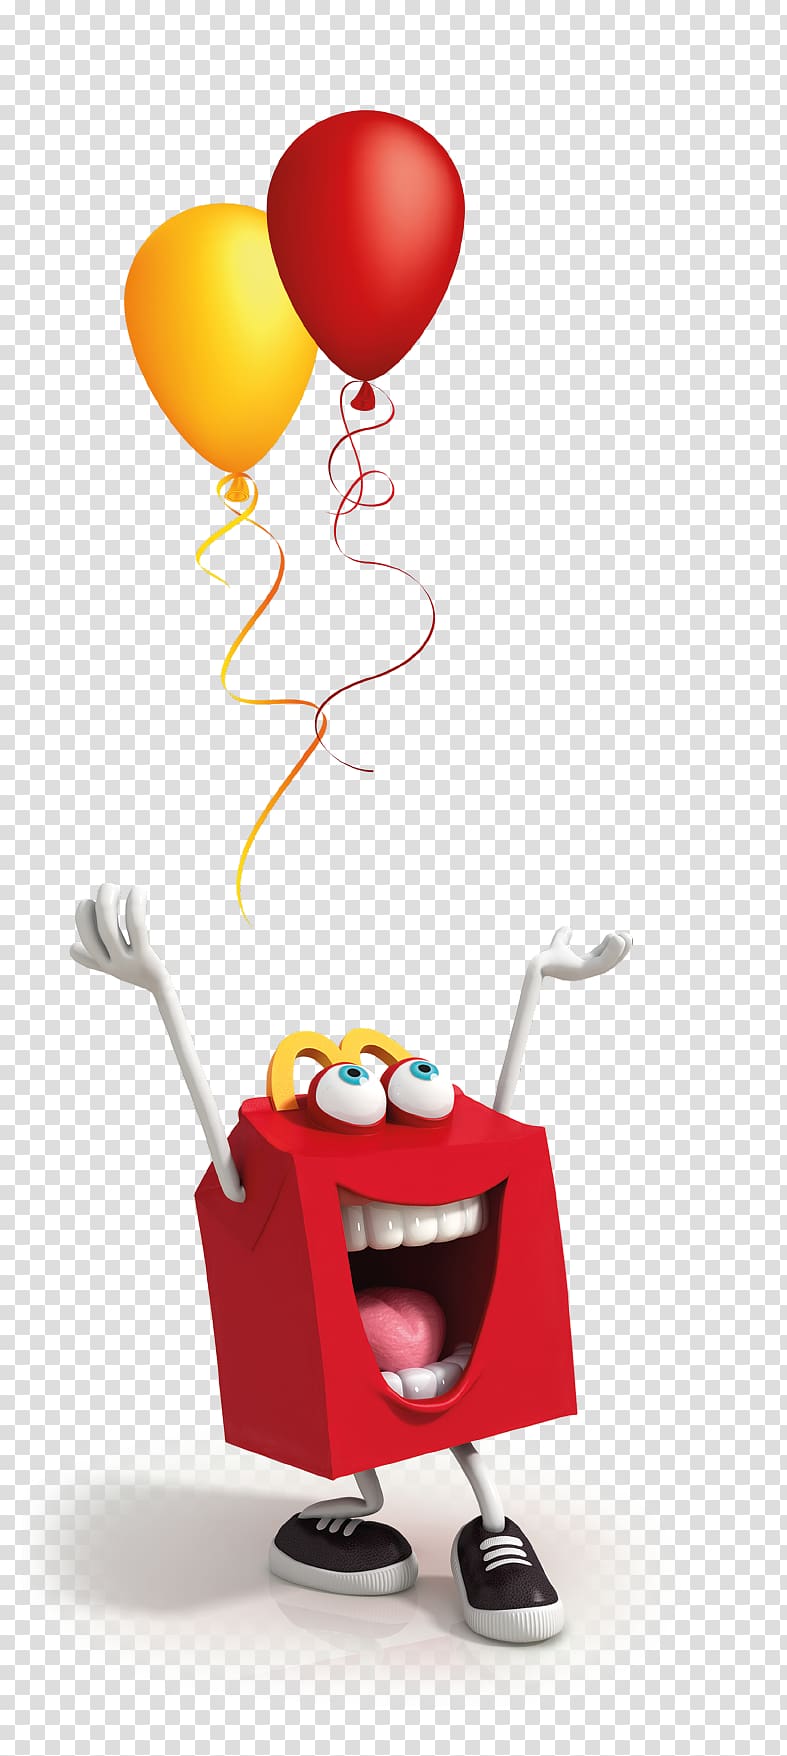 Party McDonald\'s Birthday Ronald McDonald Happy Meal, party transparent background PNG clipart